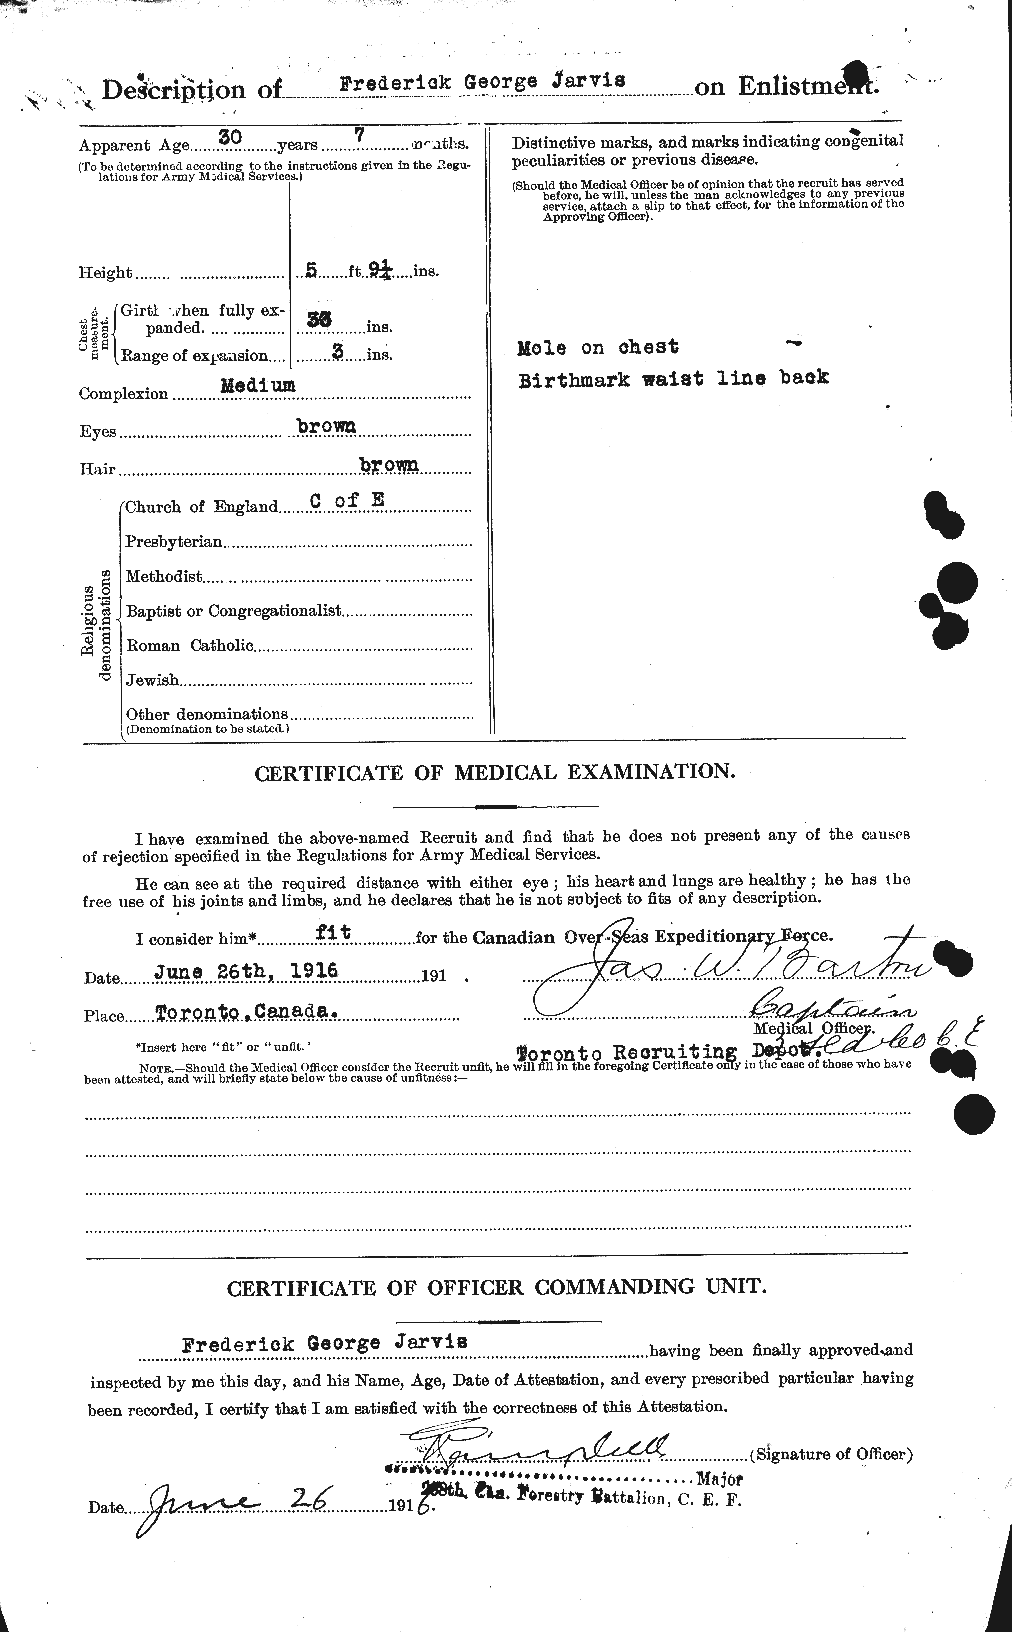 Personnel Records of the First World War - CEF 414696b